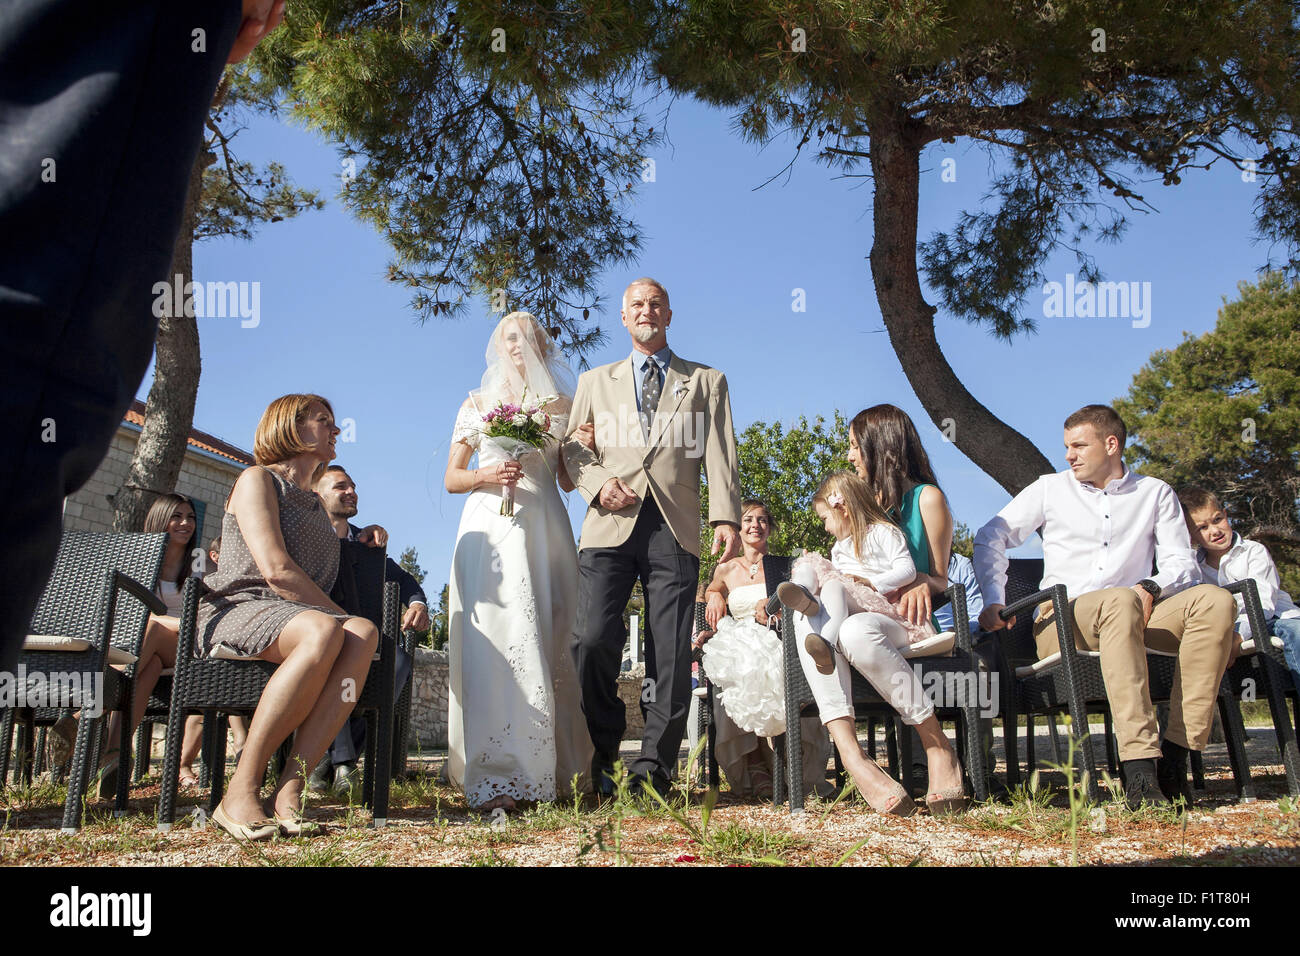 Father of the bride escorting bride at wedding ceremony on beach Stock Photo